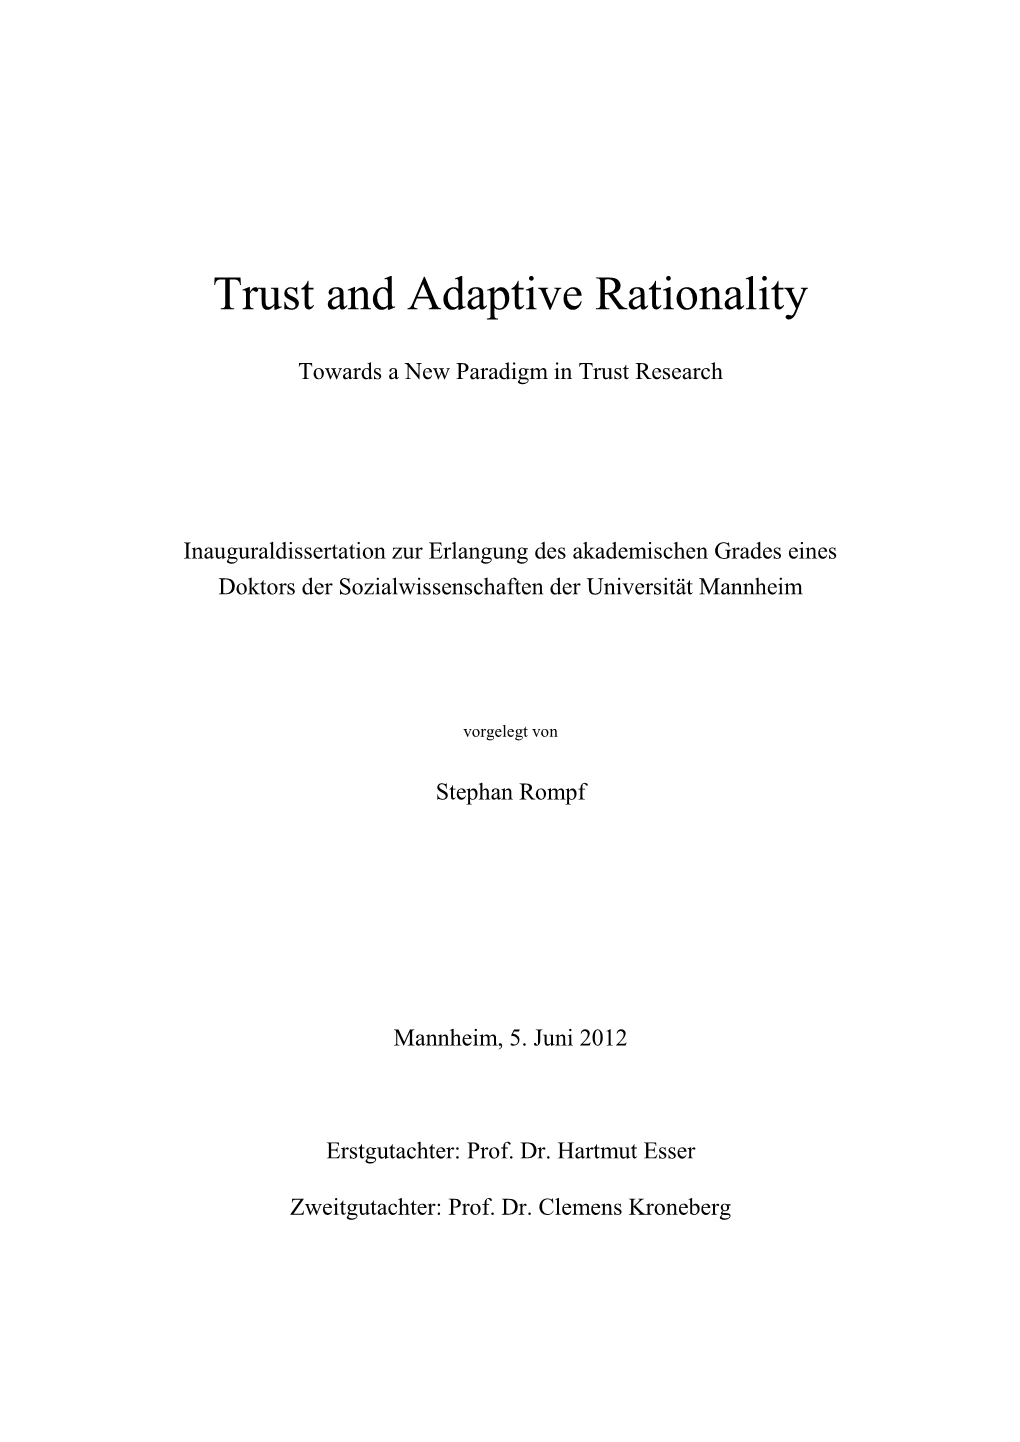 Trust and Adaptive Rationality